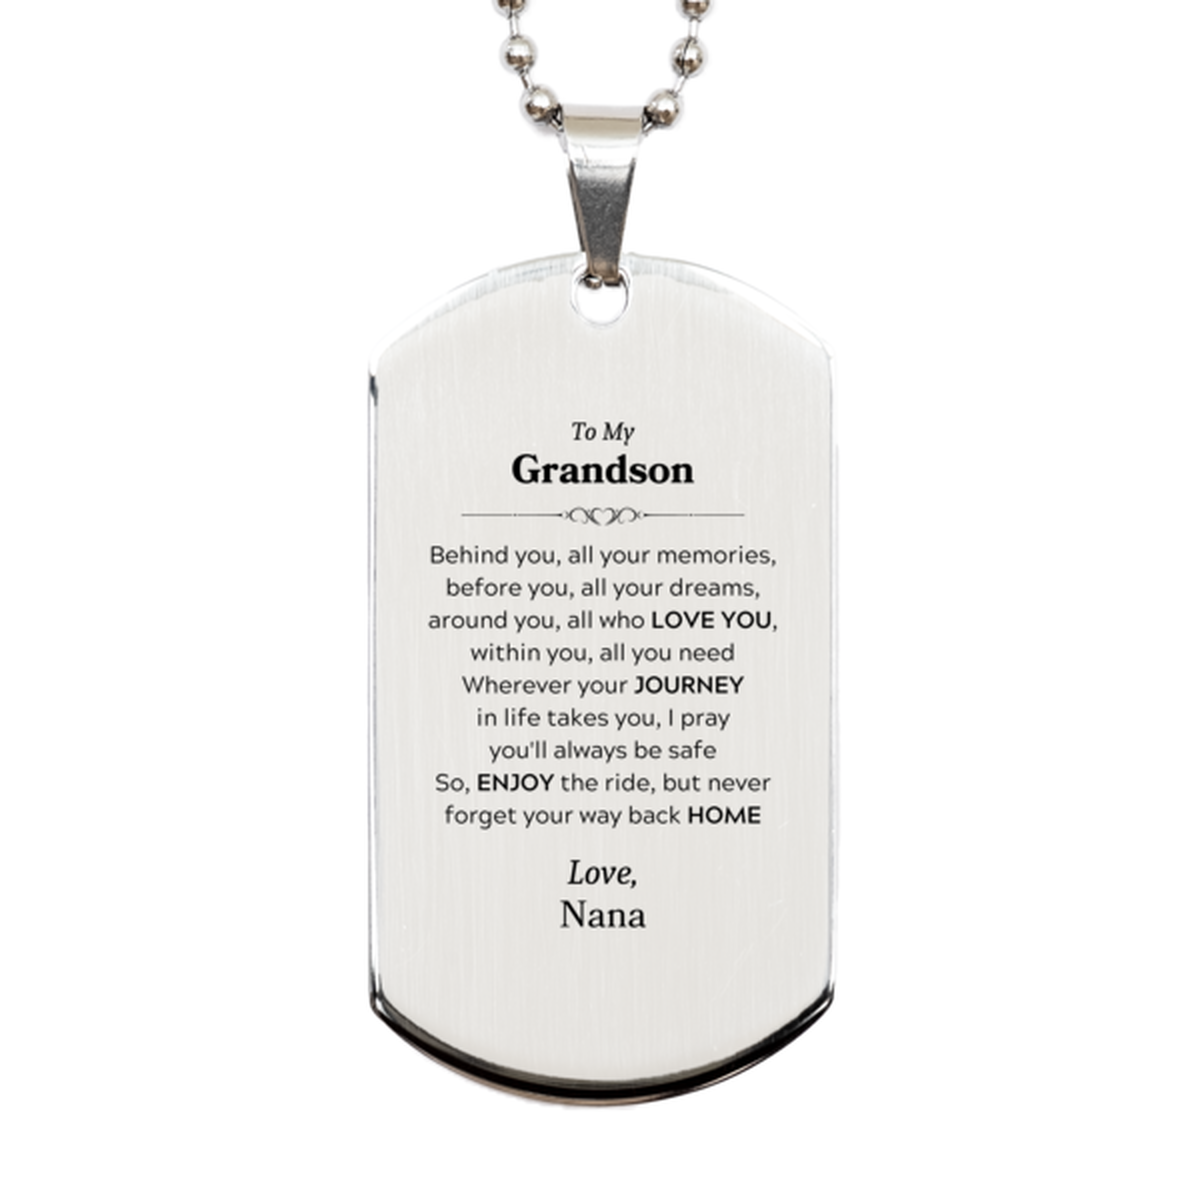 To My Grandson Graduation Gifts from Nana, Grandson Silver Dog Tag Christmas Birthday Gifts for Grandson Behind you, all your memories, before you, all your dreams. Love, Nana